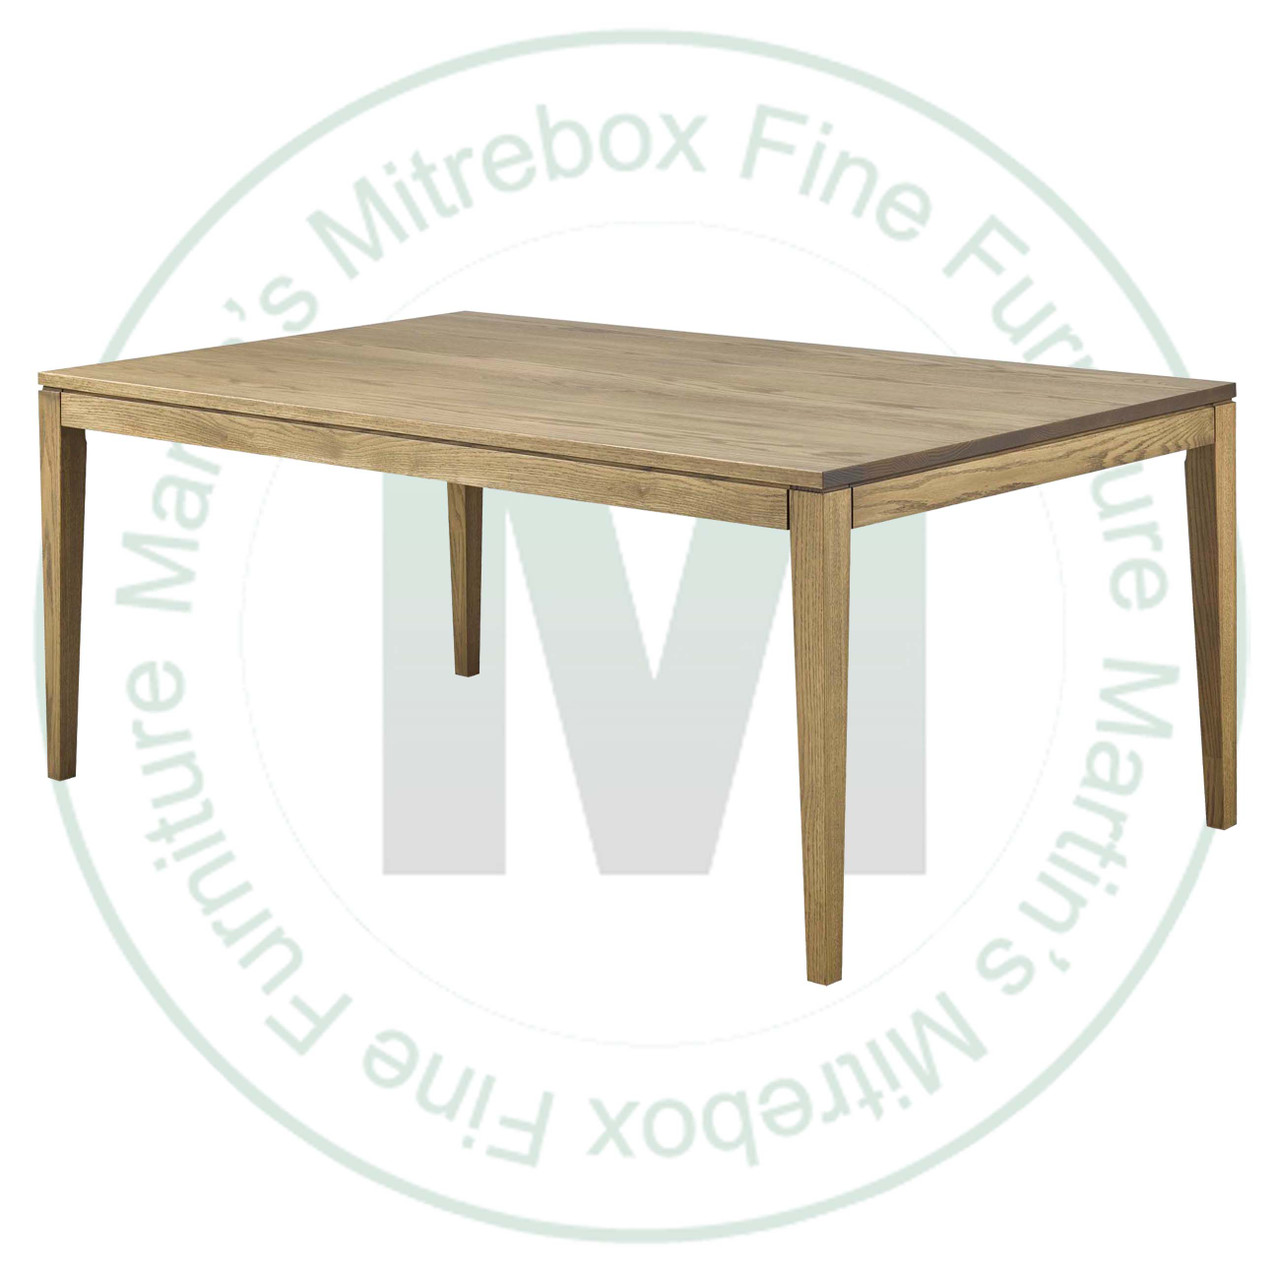 Oak Vega Solid Top Harvest Table 42''D x 84''W x 30''H With 2 - 16'' Extensions